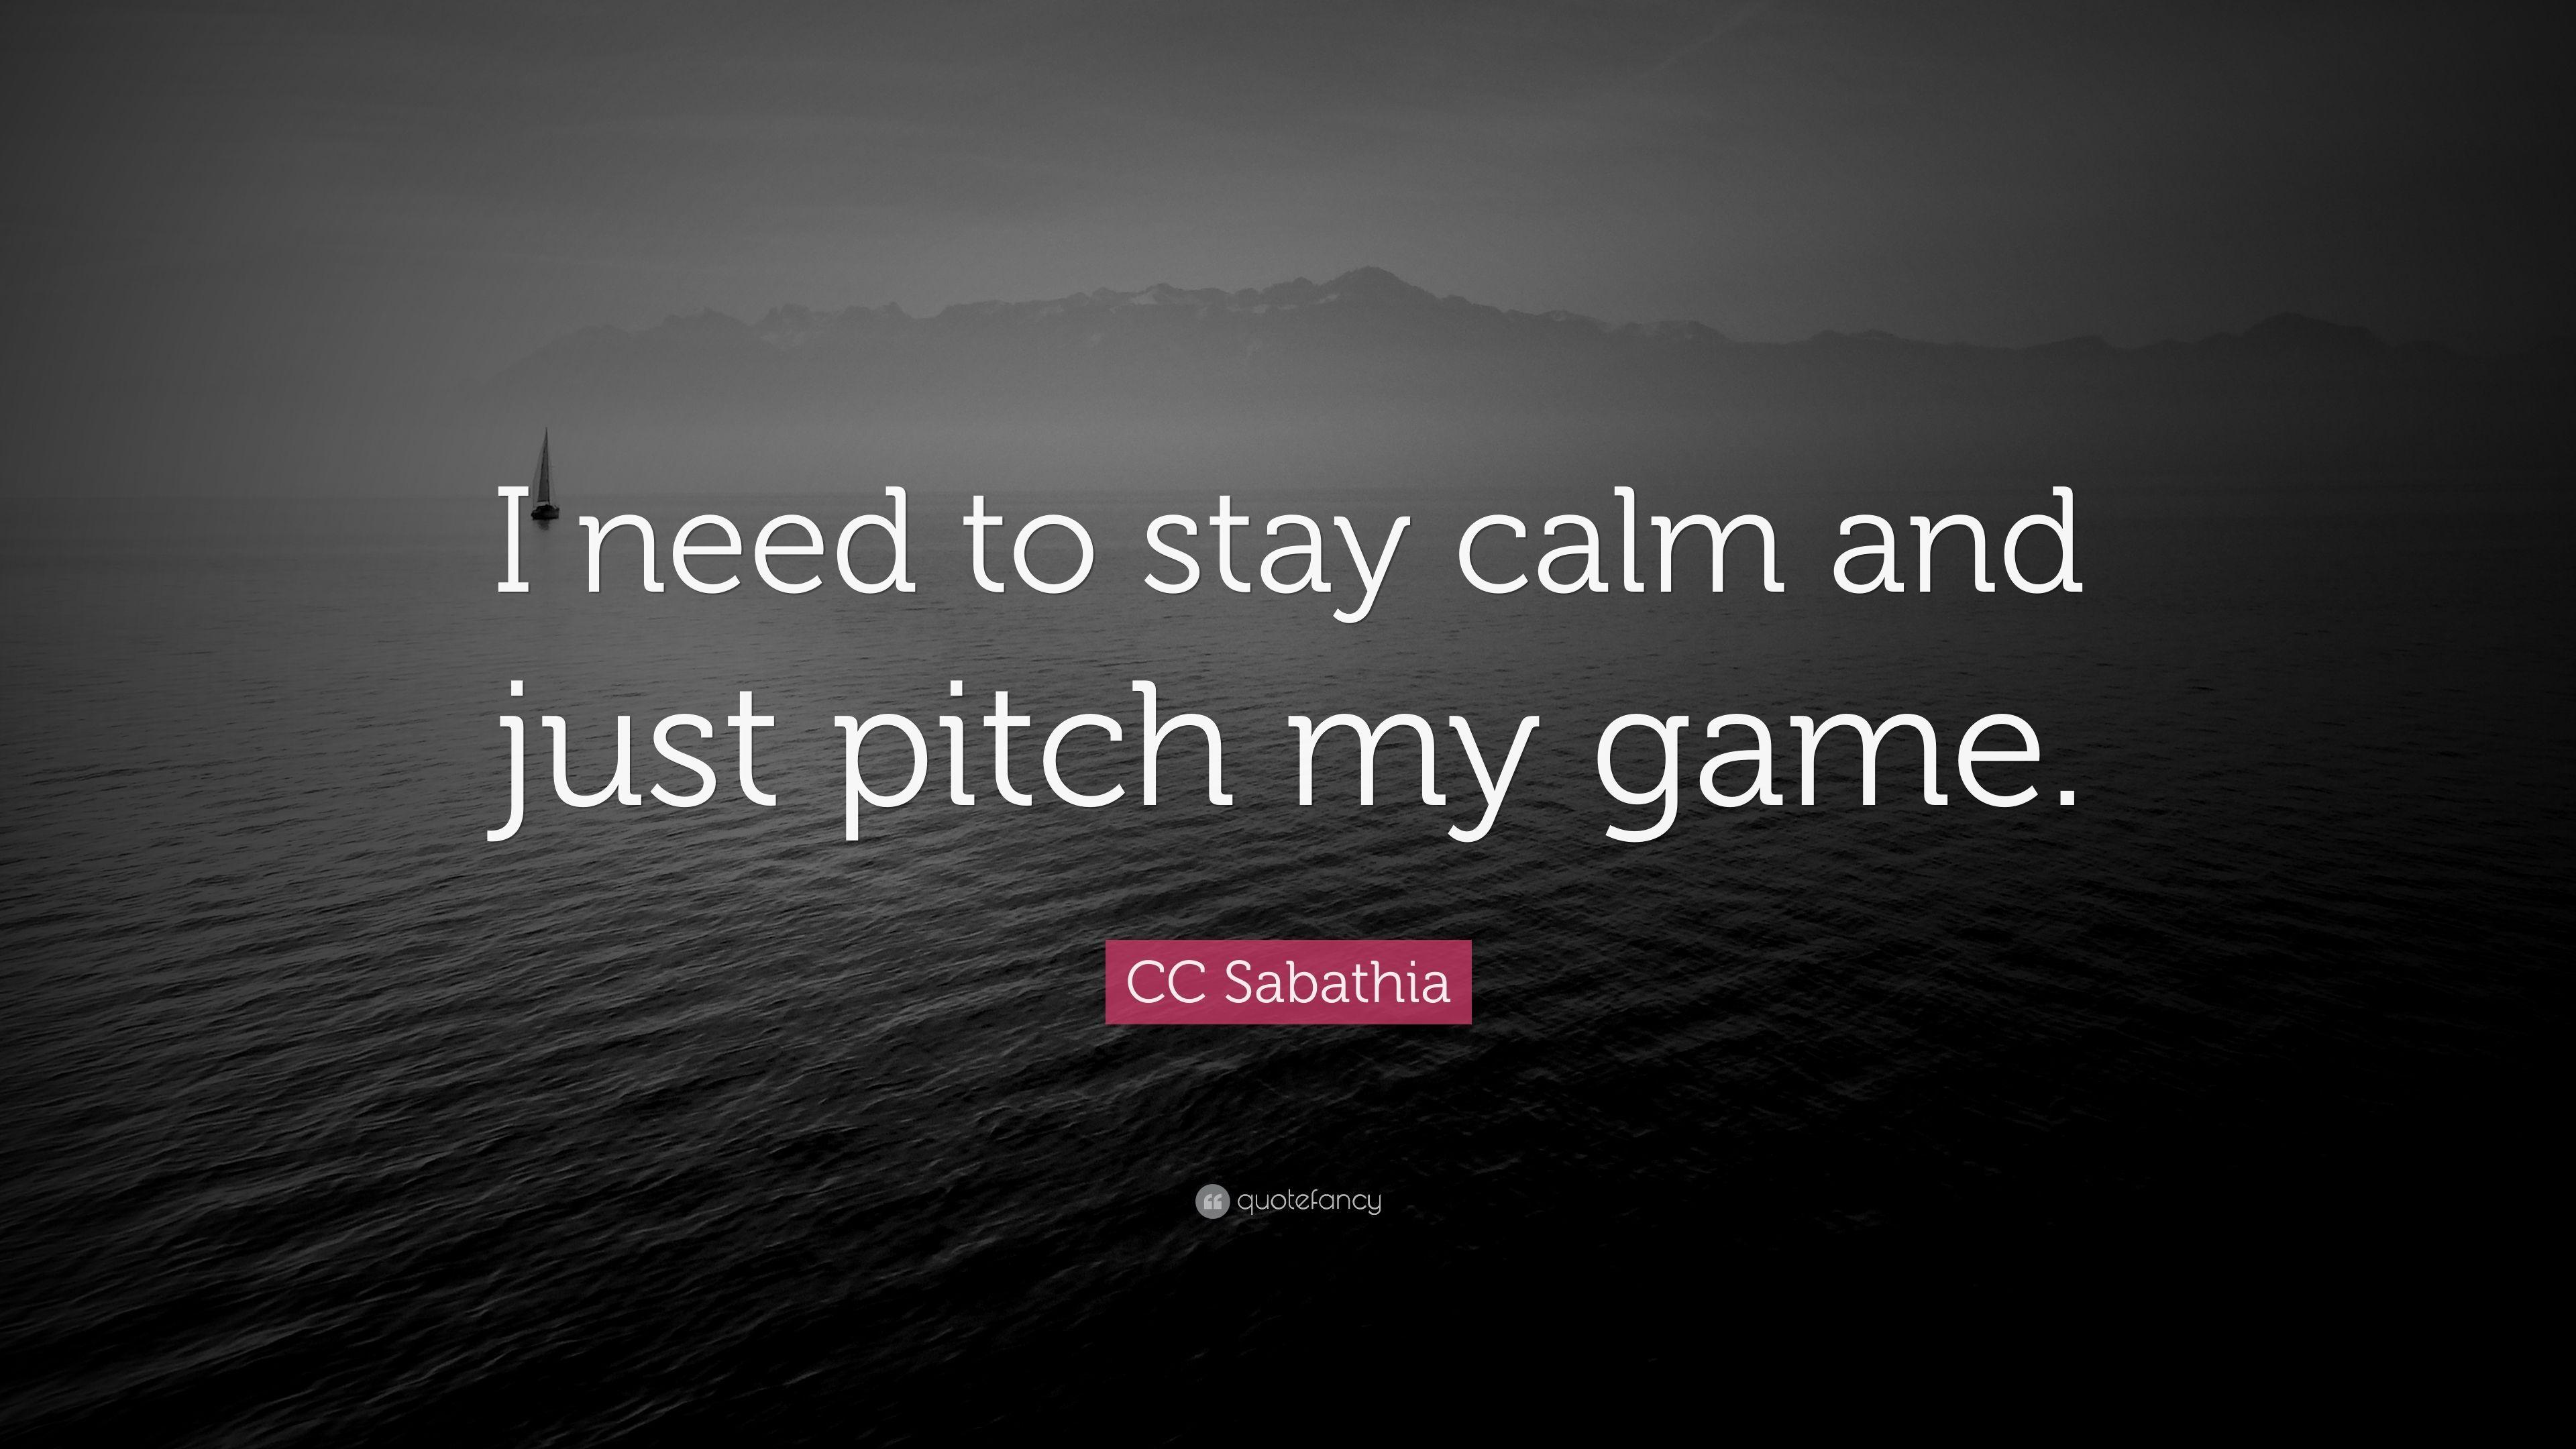 CC Sabathia Quote: “I need to stay calm and just pitch my game